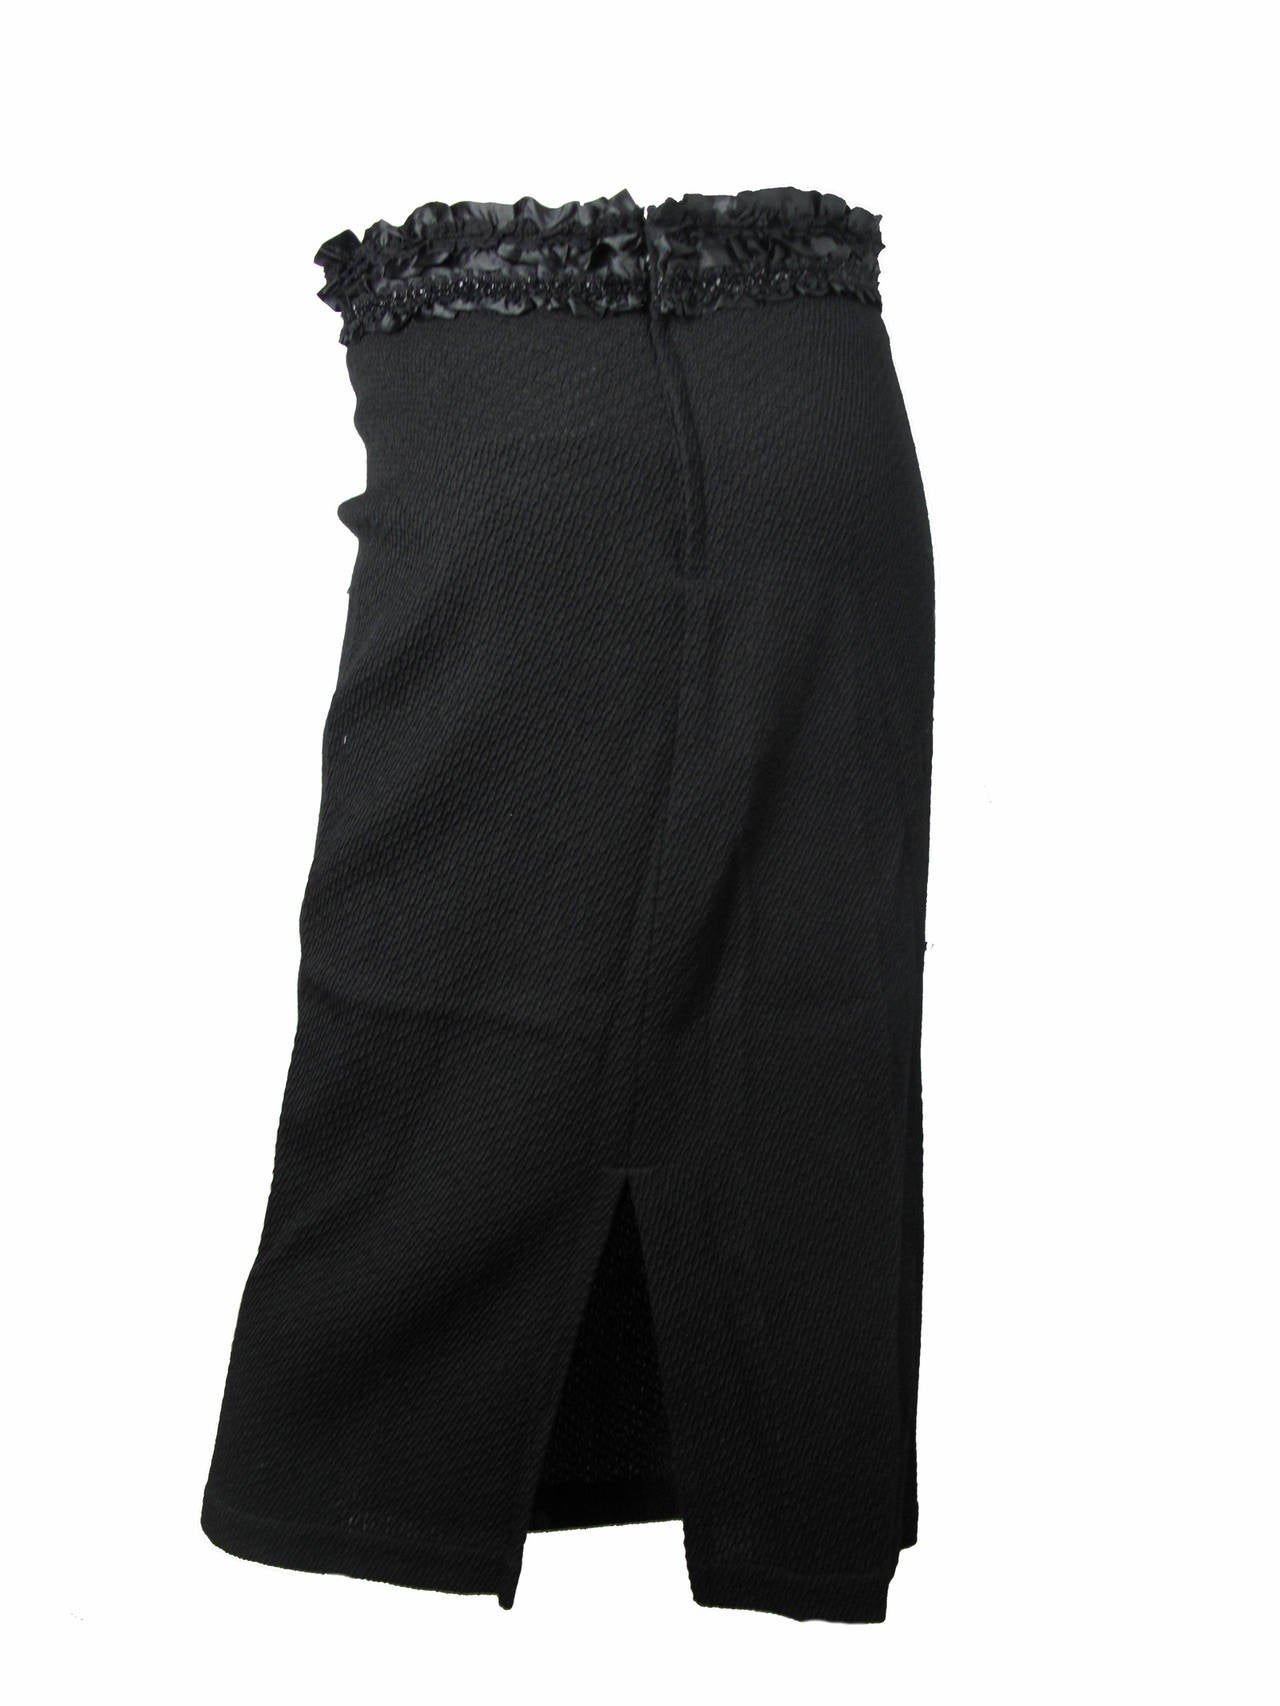 Black Comme des Garcons skirt with embellished waistband, circa 2008